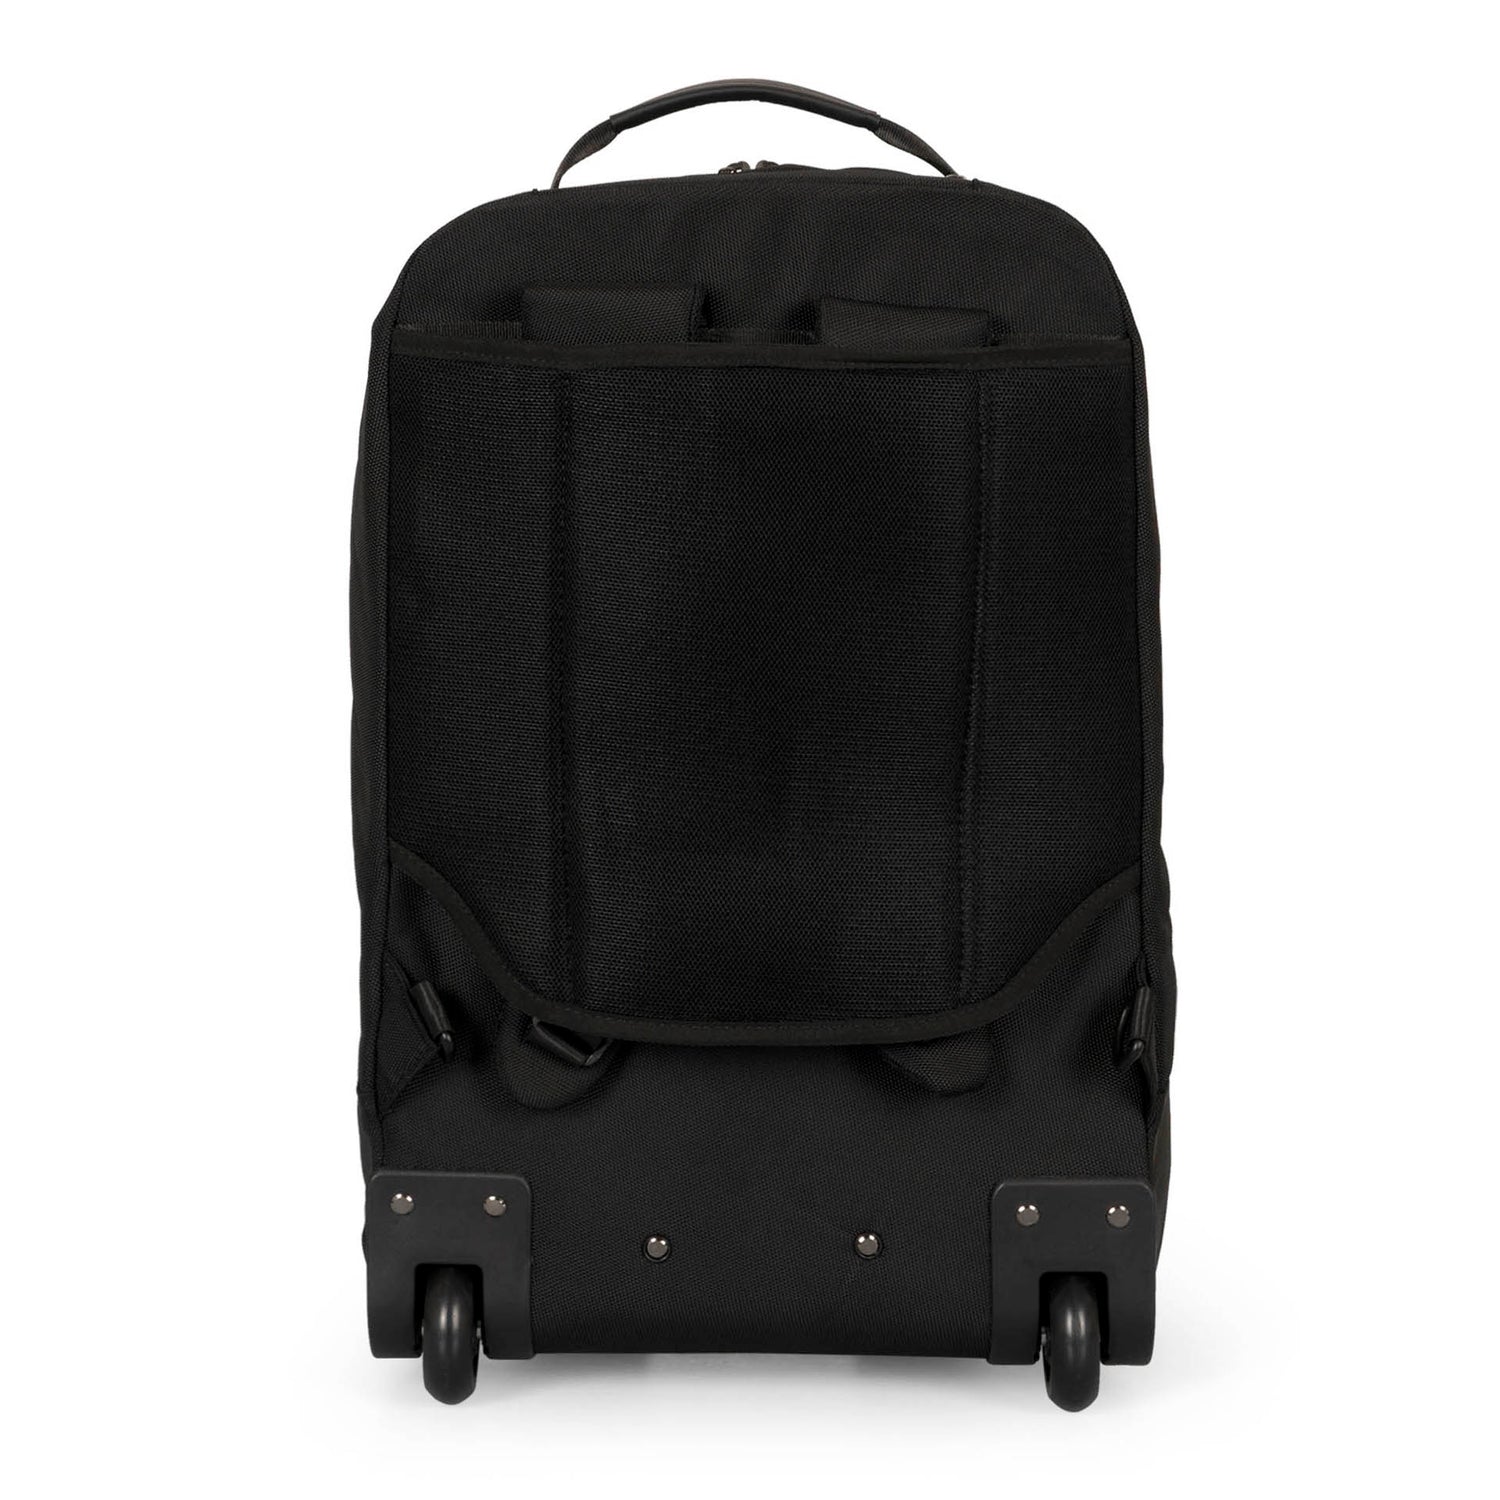 Back side of a black backpack on wheels called Wellington designed by tracker on white background, showcasing padded shoulder straps and back panel along with its top handle and wheels.